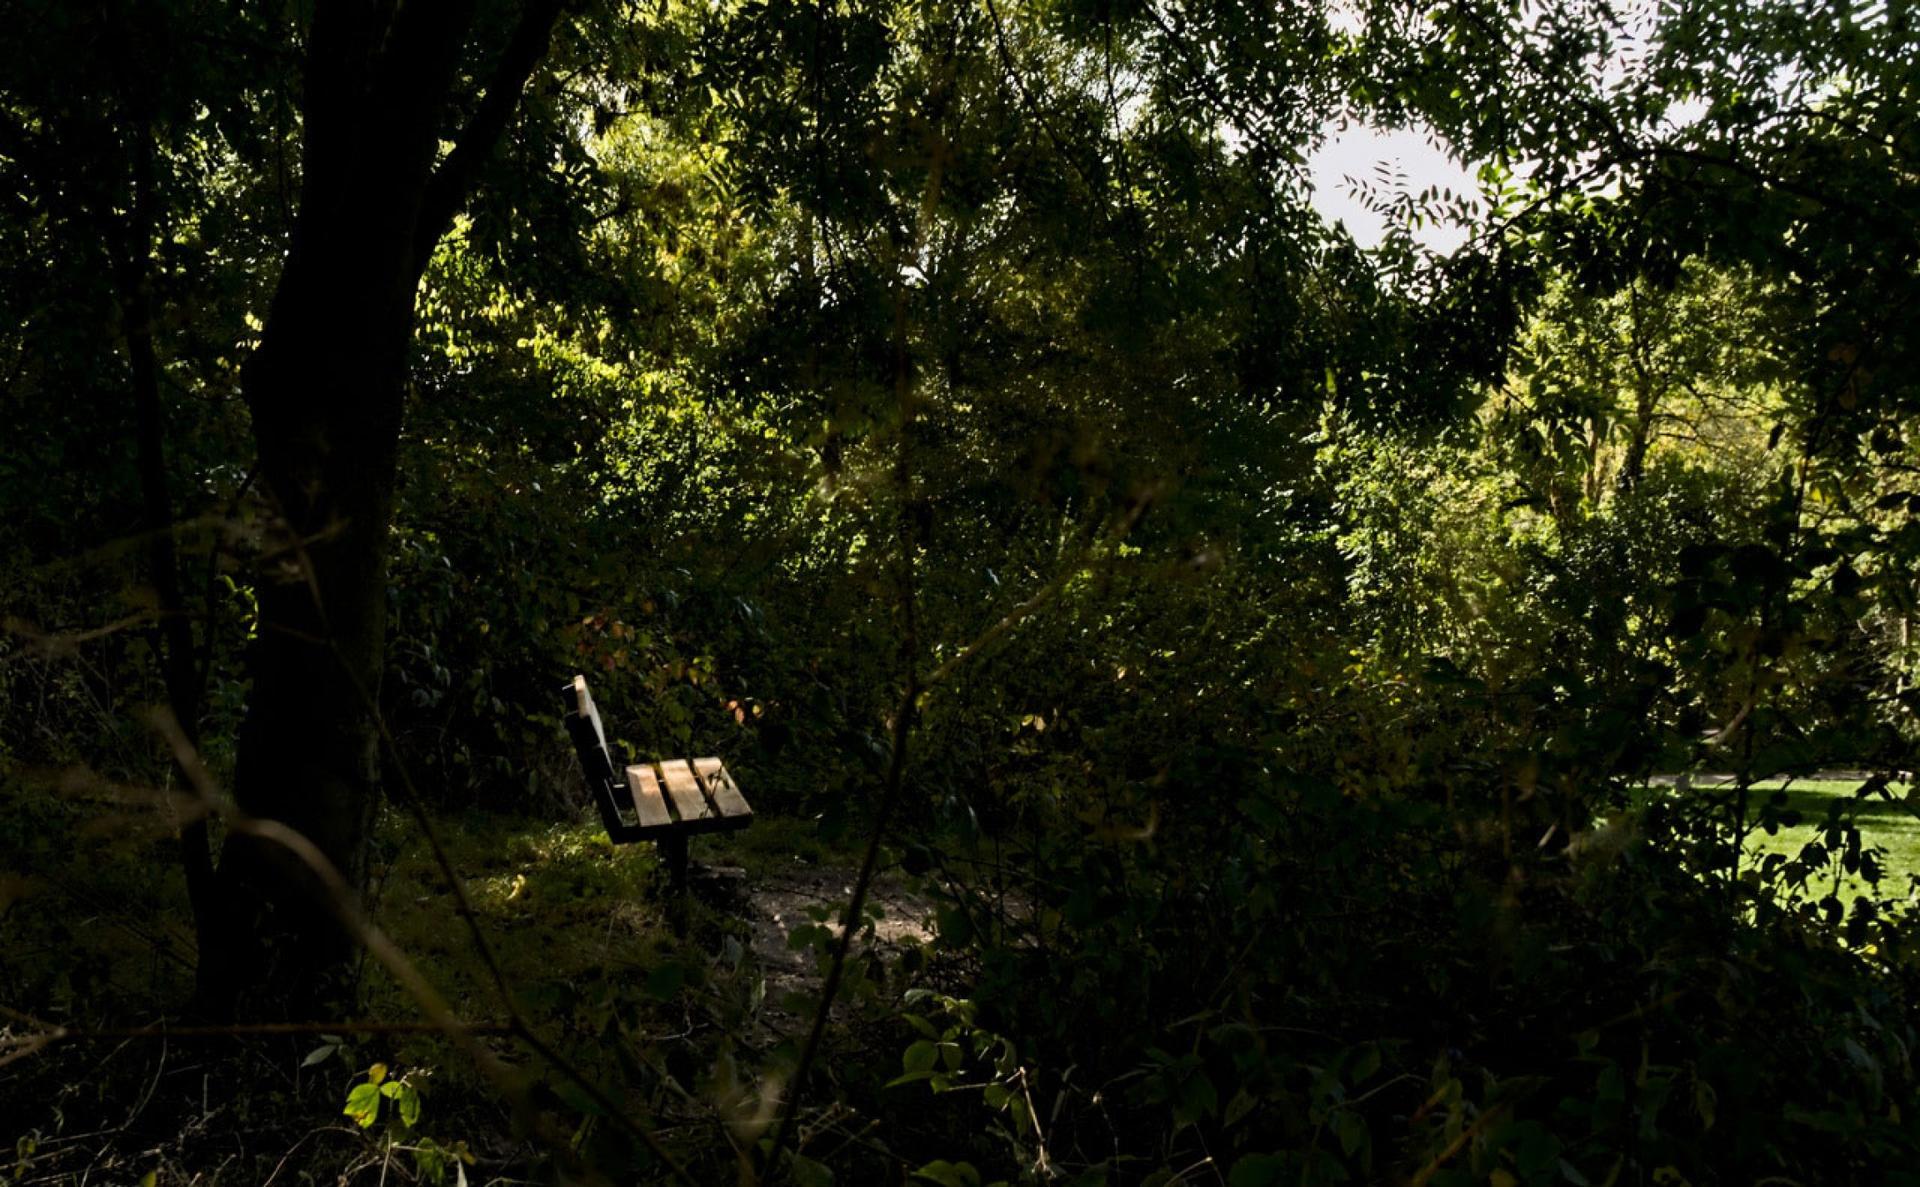 A single wooden bench is shown surrounded by trees and looking out to where bright light is showning.